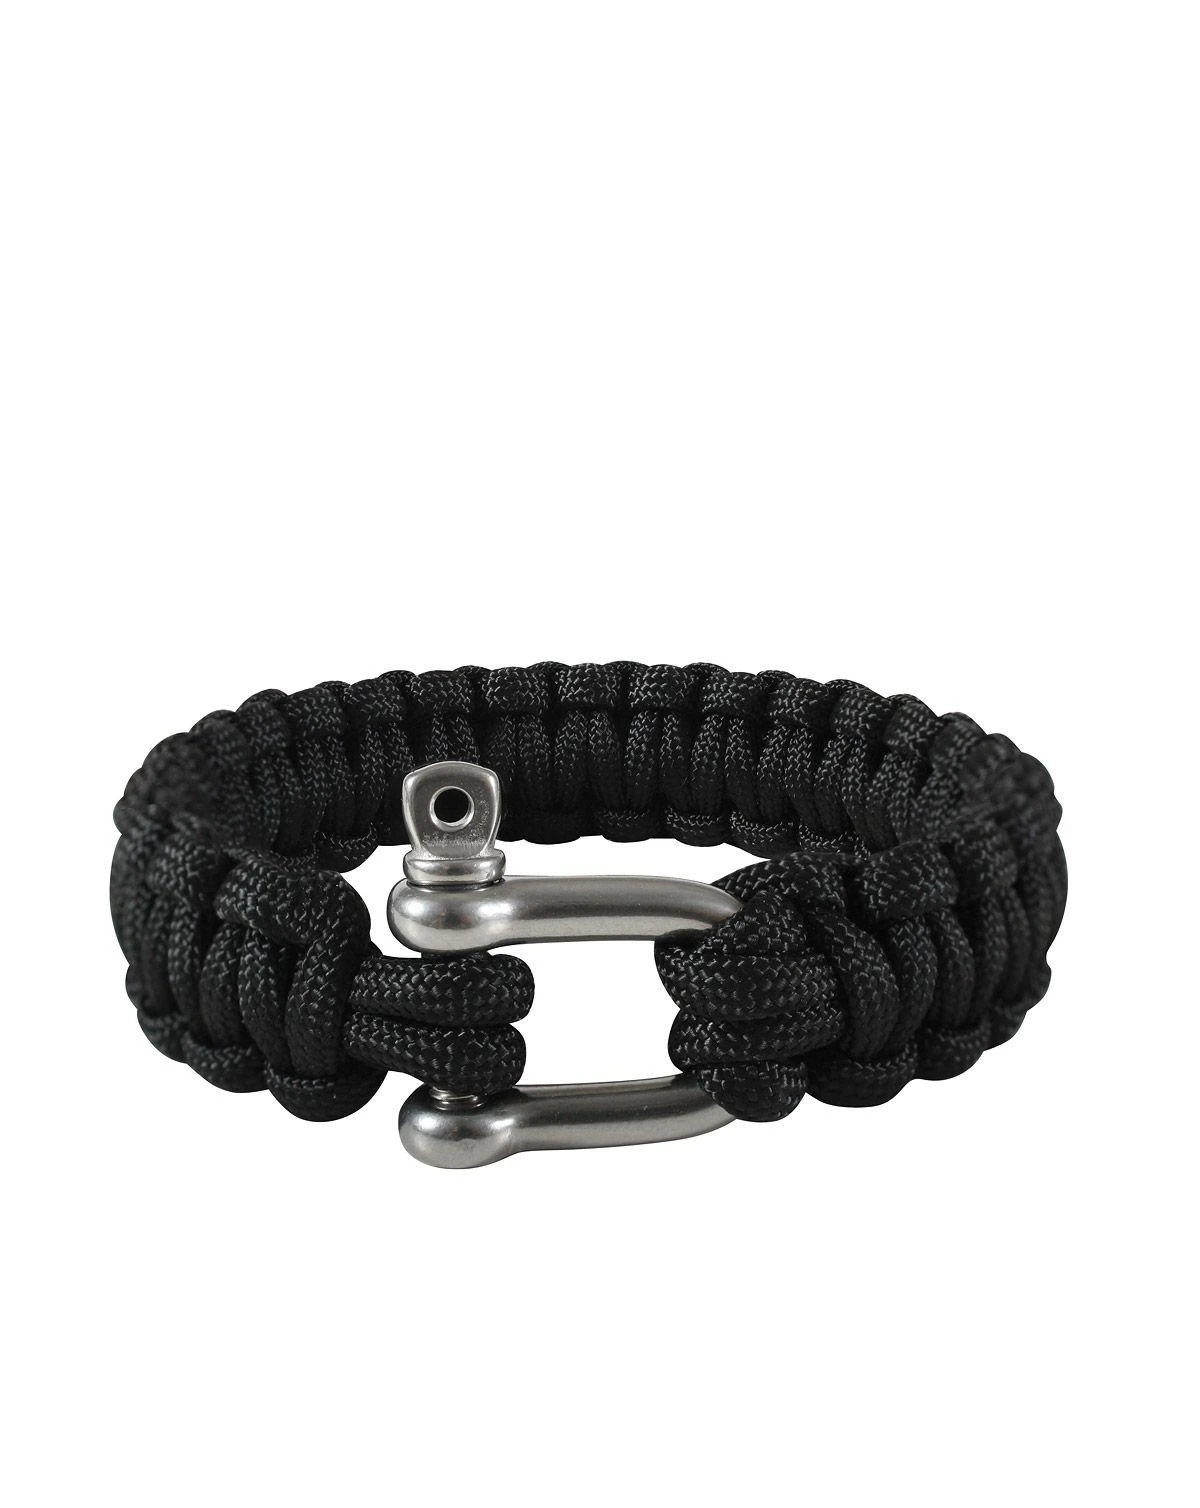 European Type Heavy Industry Paracord Bracelet 304 Stainless Steel Polished D  Shackle  China Shackle D Shackle  MadeinChinacom